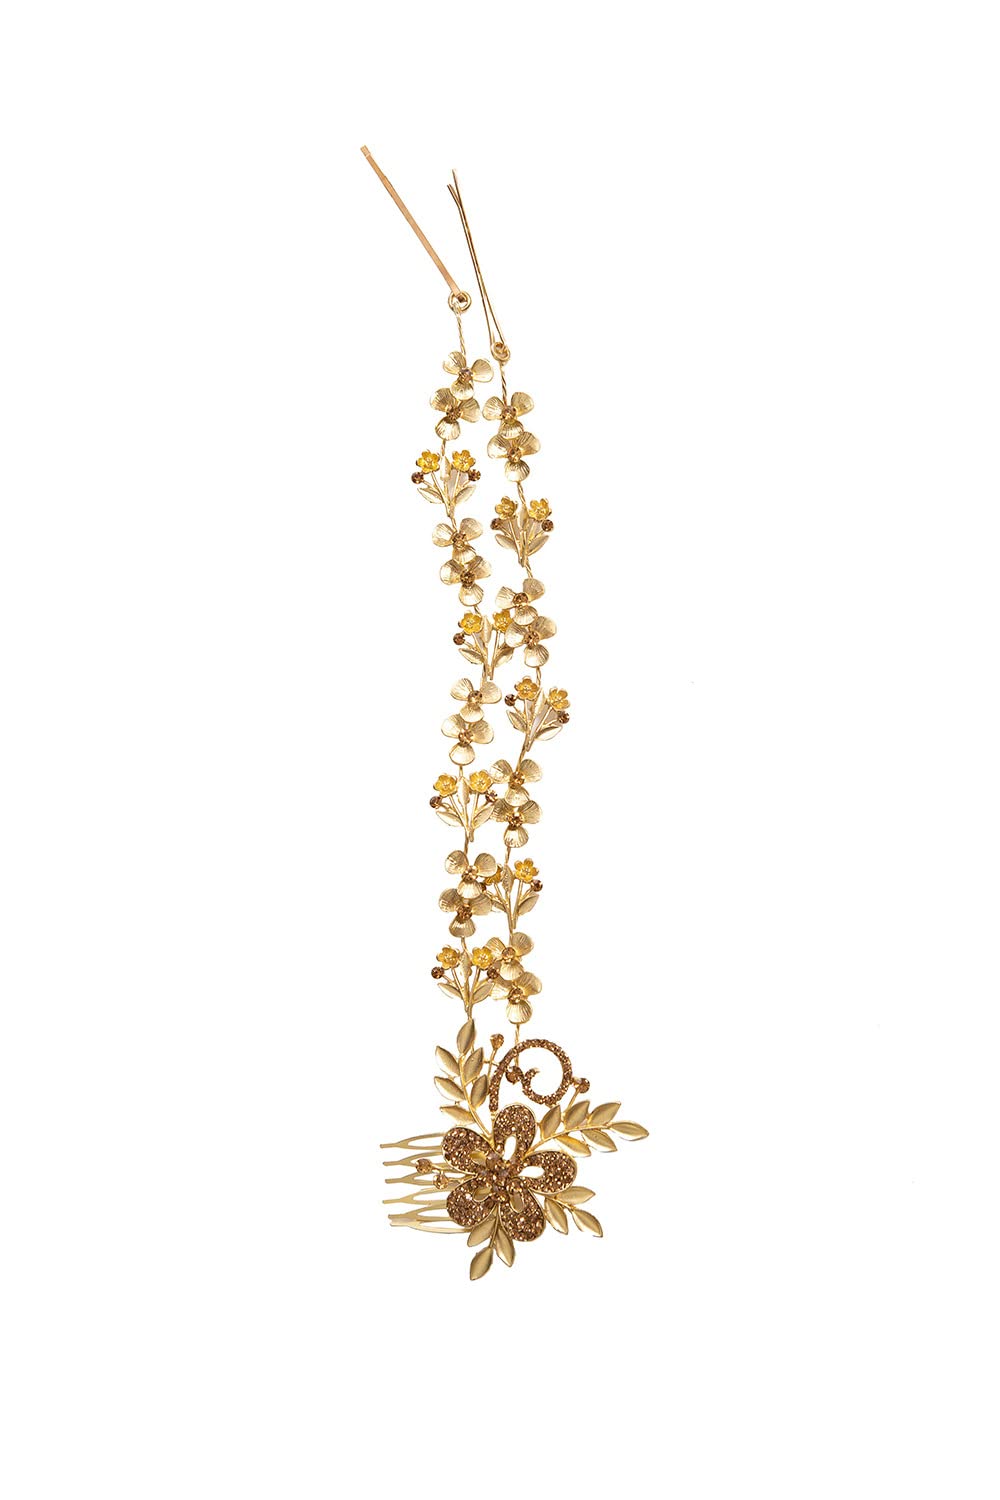 Women's Lustrous Lily Gold Flower Bejeweled 1920's Hair Ornament